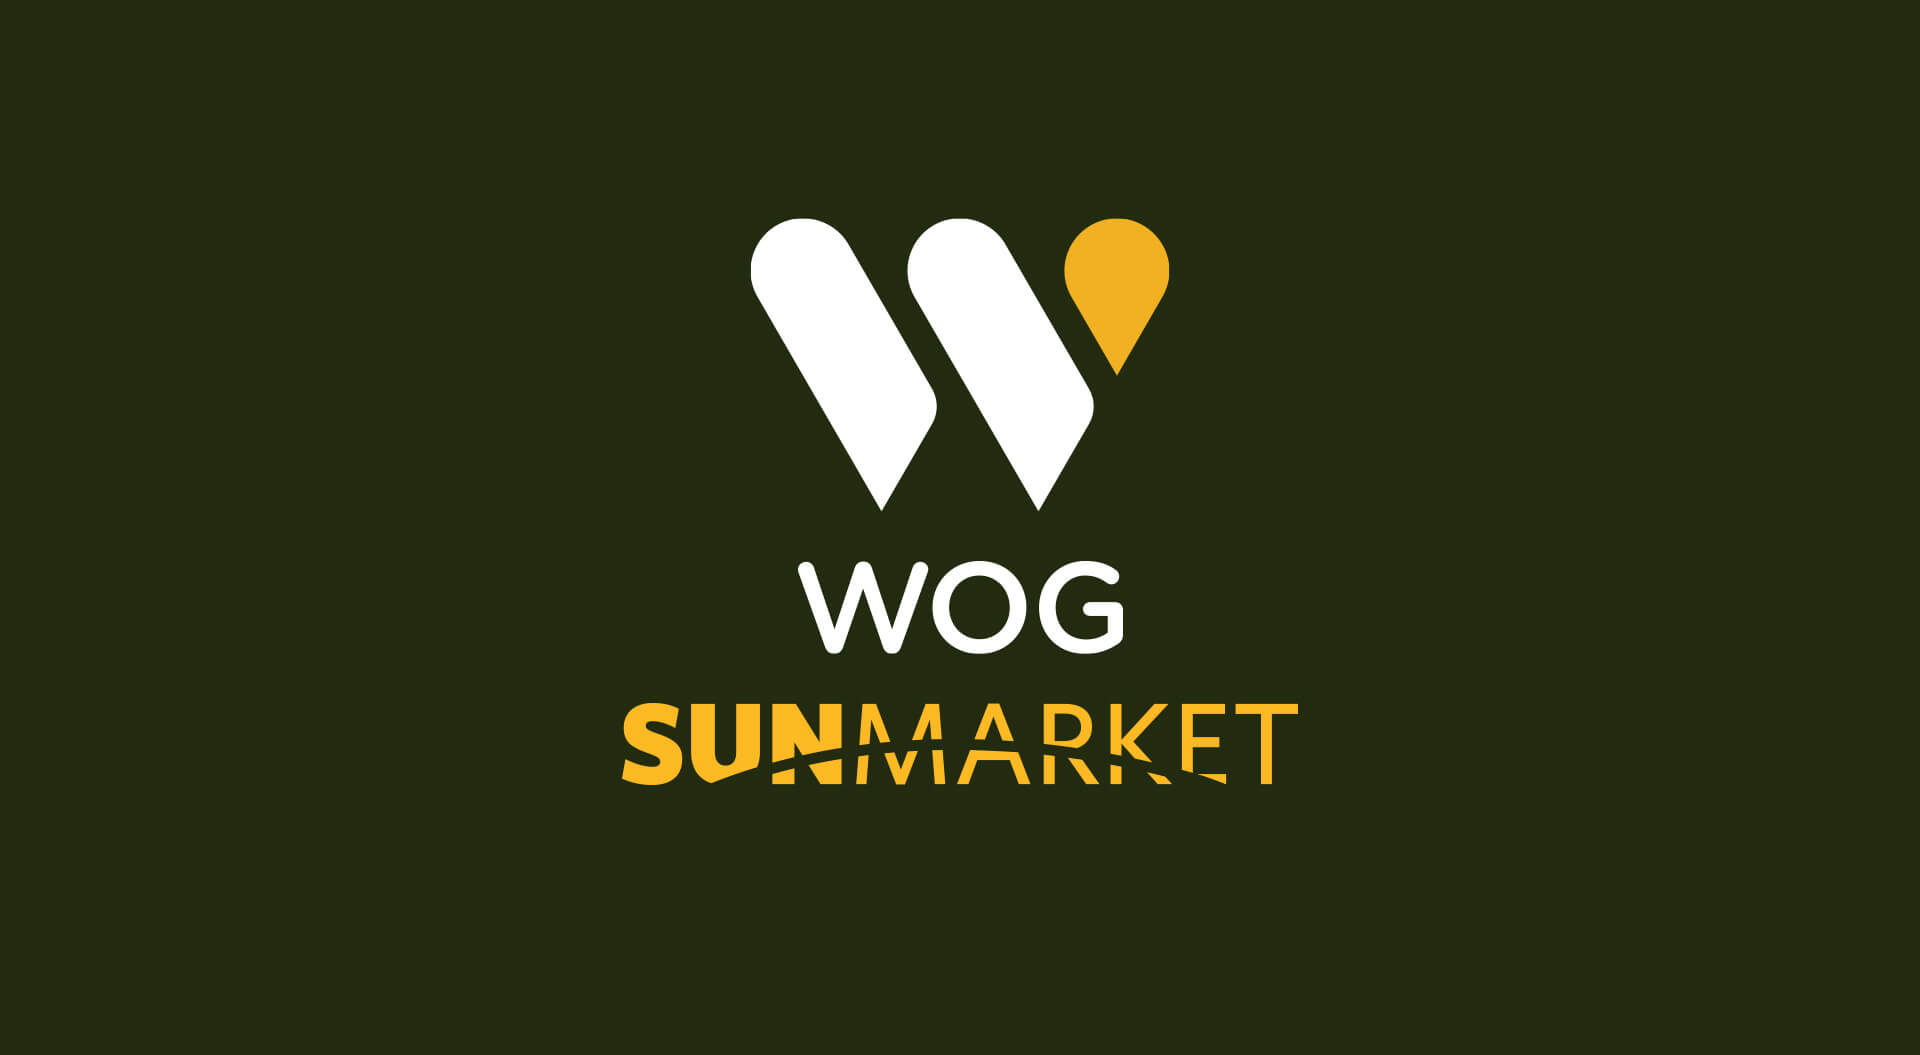 Petrol forecourt branding, design, retail, filling stations, convenience stores, brand identity, marketing strategies, concept ideas, innovation, inspiring, future trends, new - WOG, Western Oil Group Ukraine